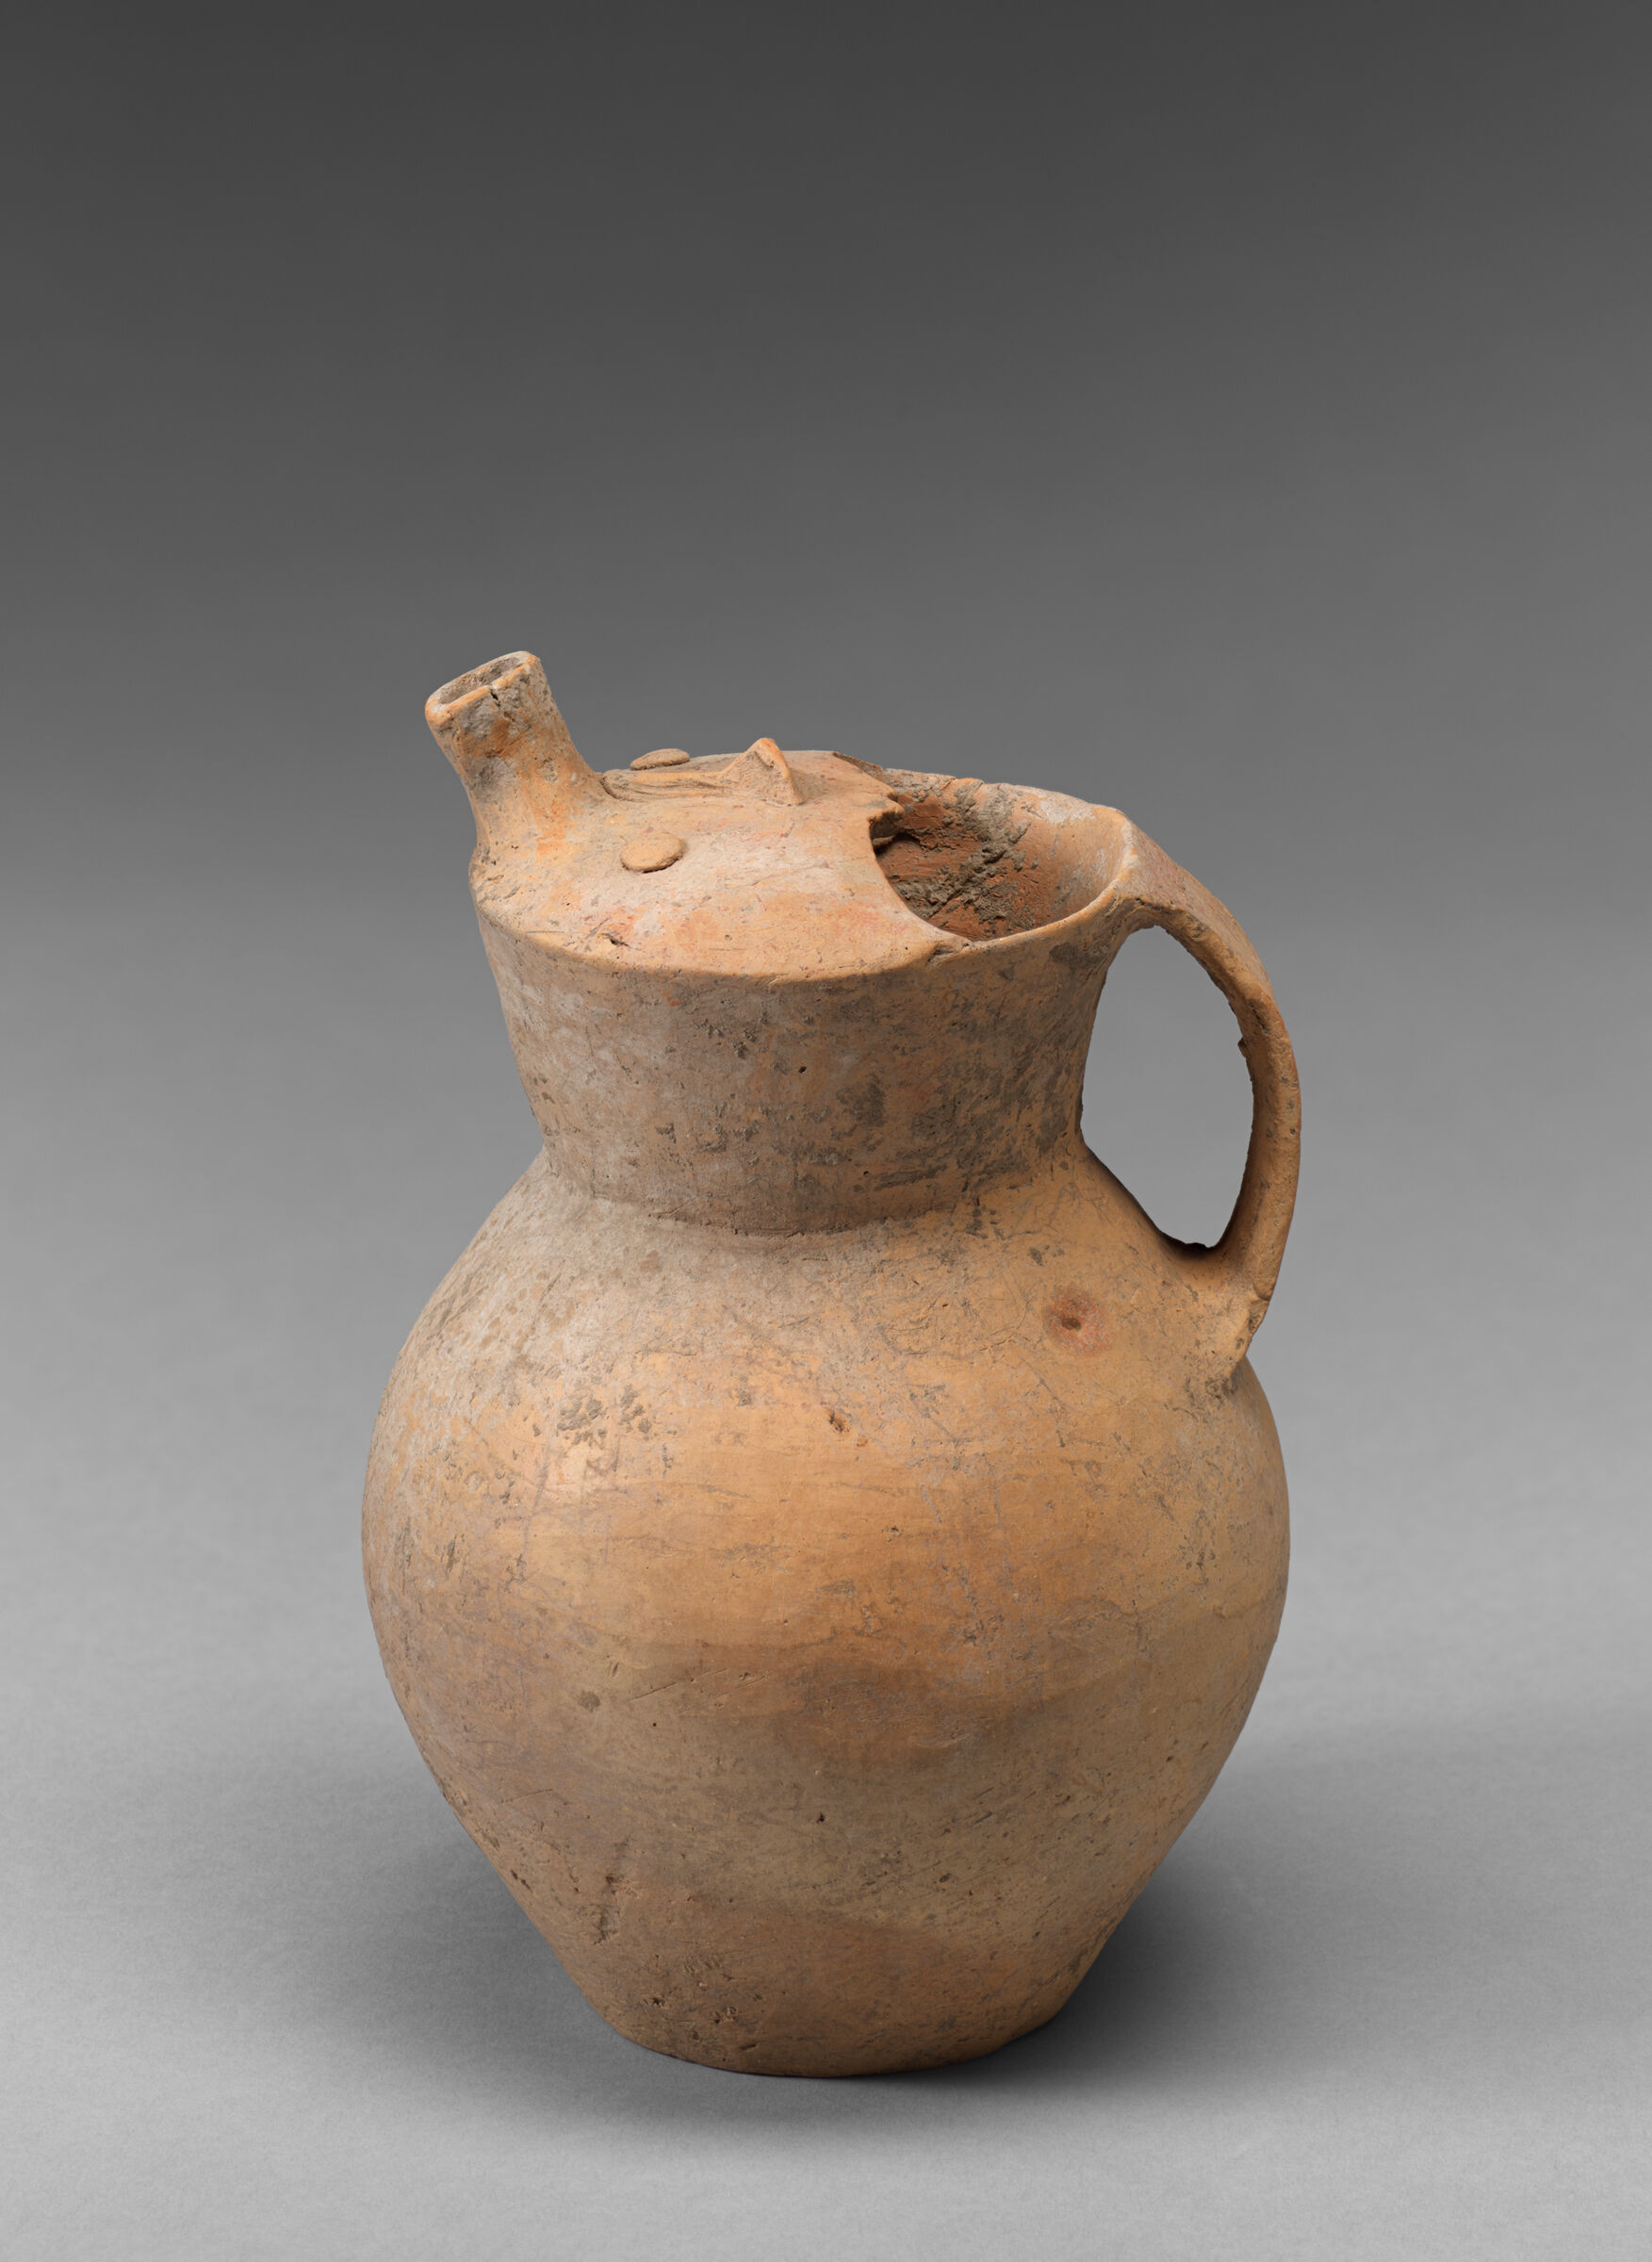 Spouted Jug With Anthropomorphic Top